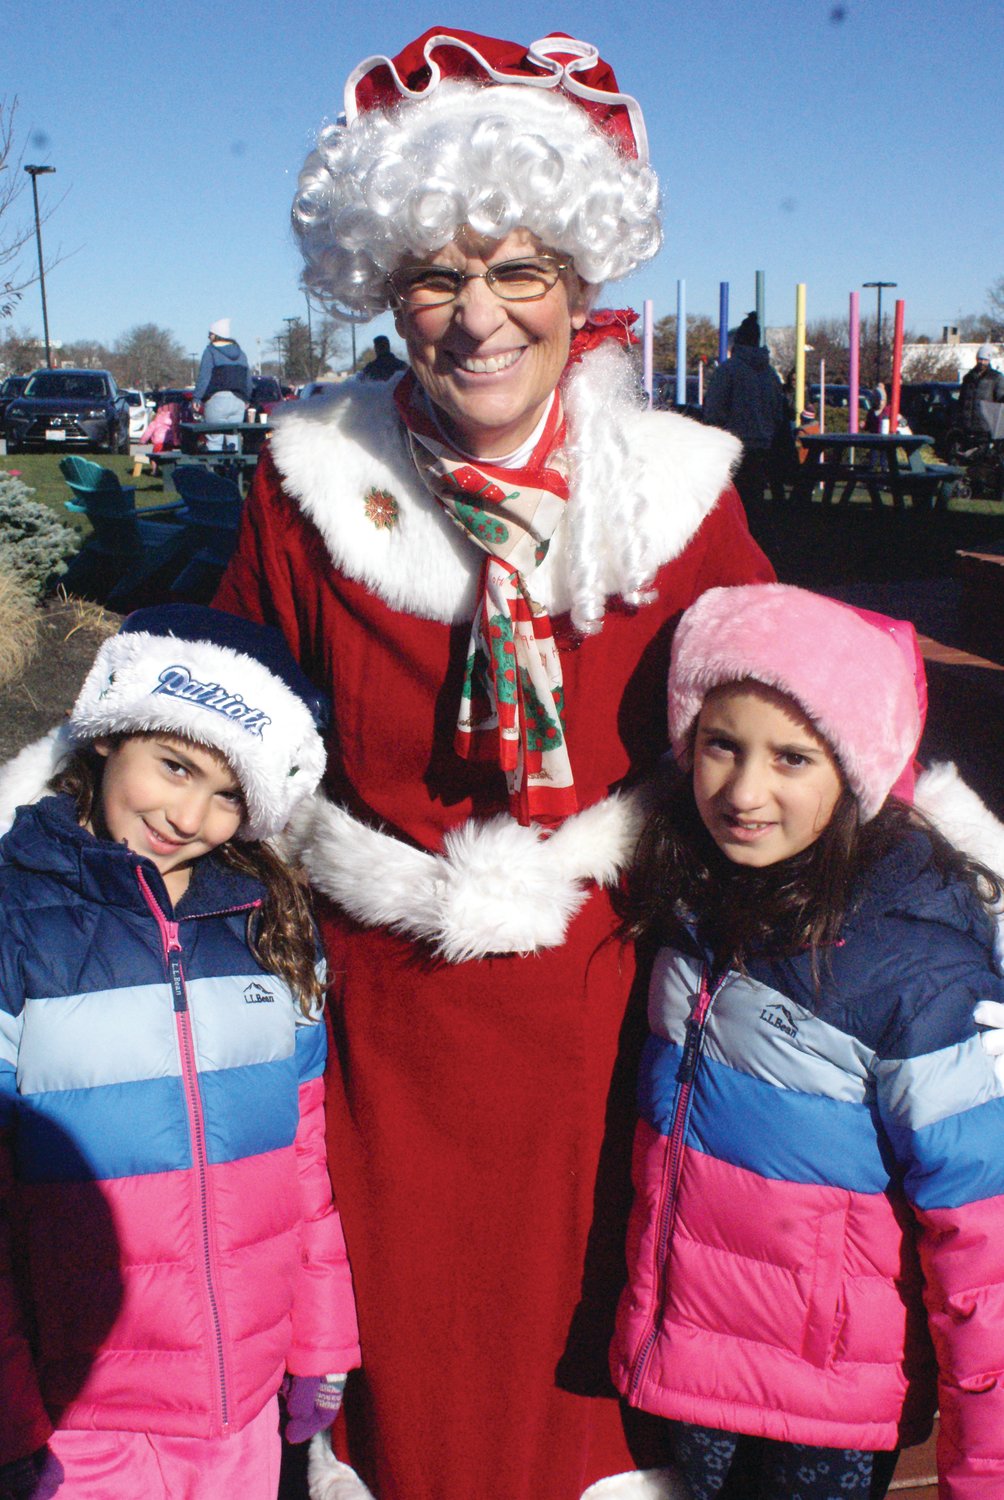 VISITING WITH HER HUSBAND: Mrs. Claus with sisters Gia, 5, and Ella DeLucia, 8.